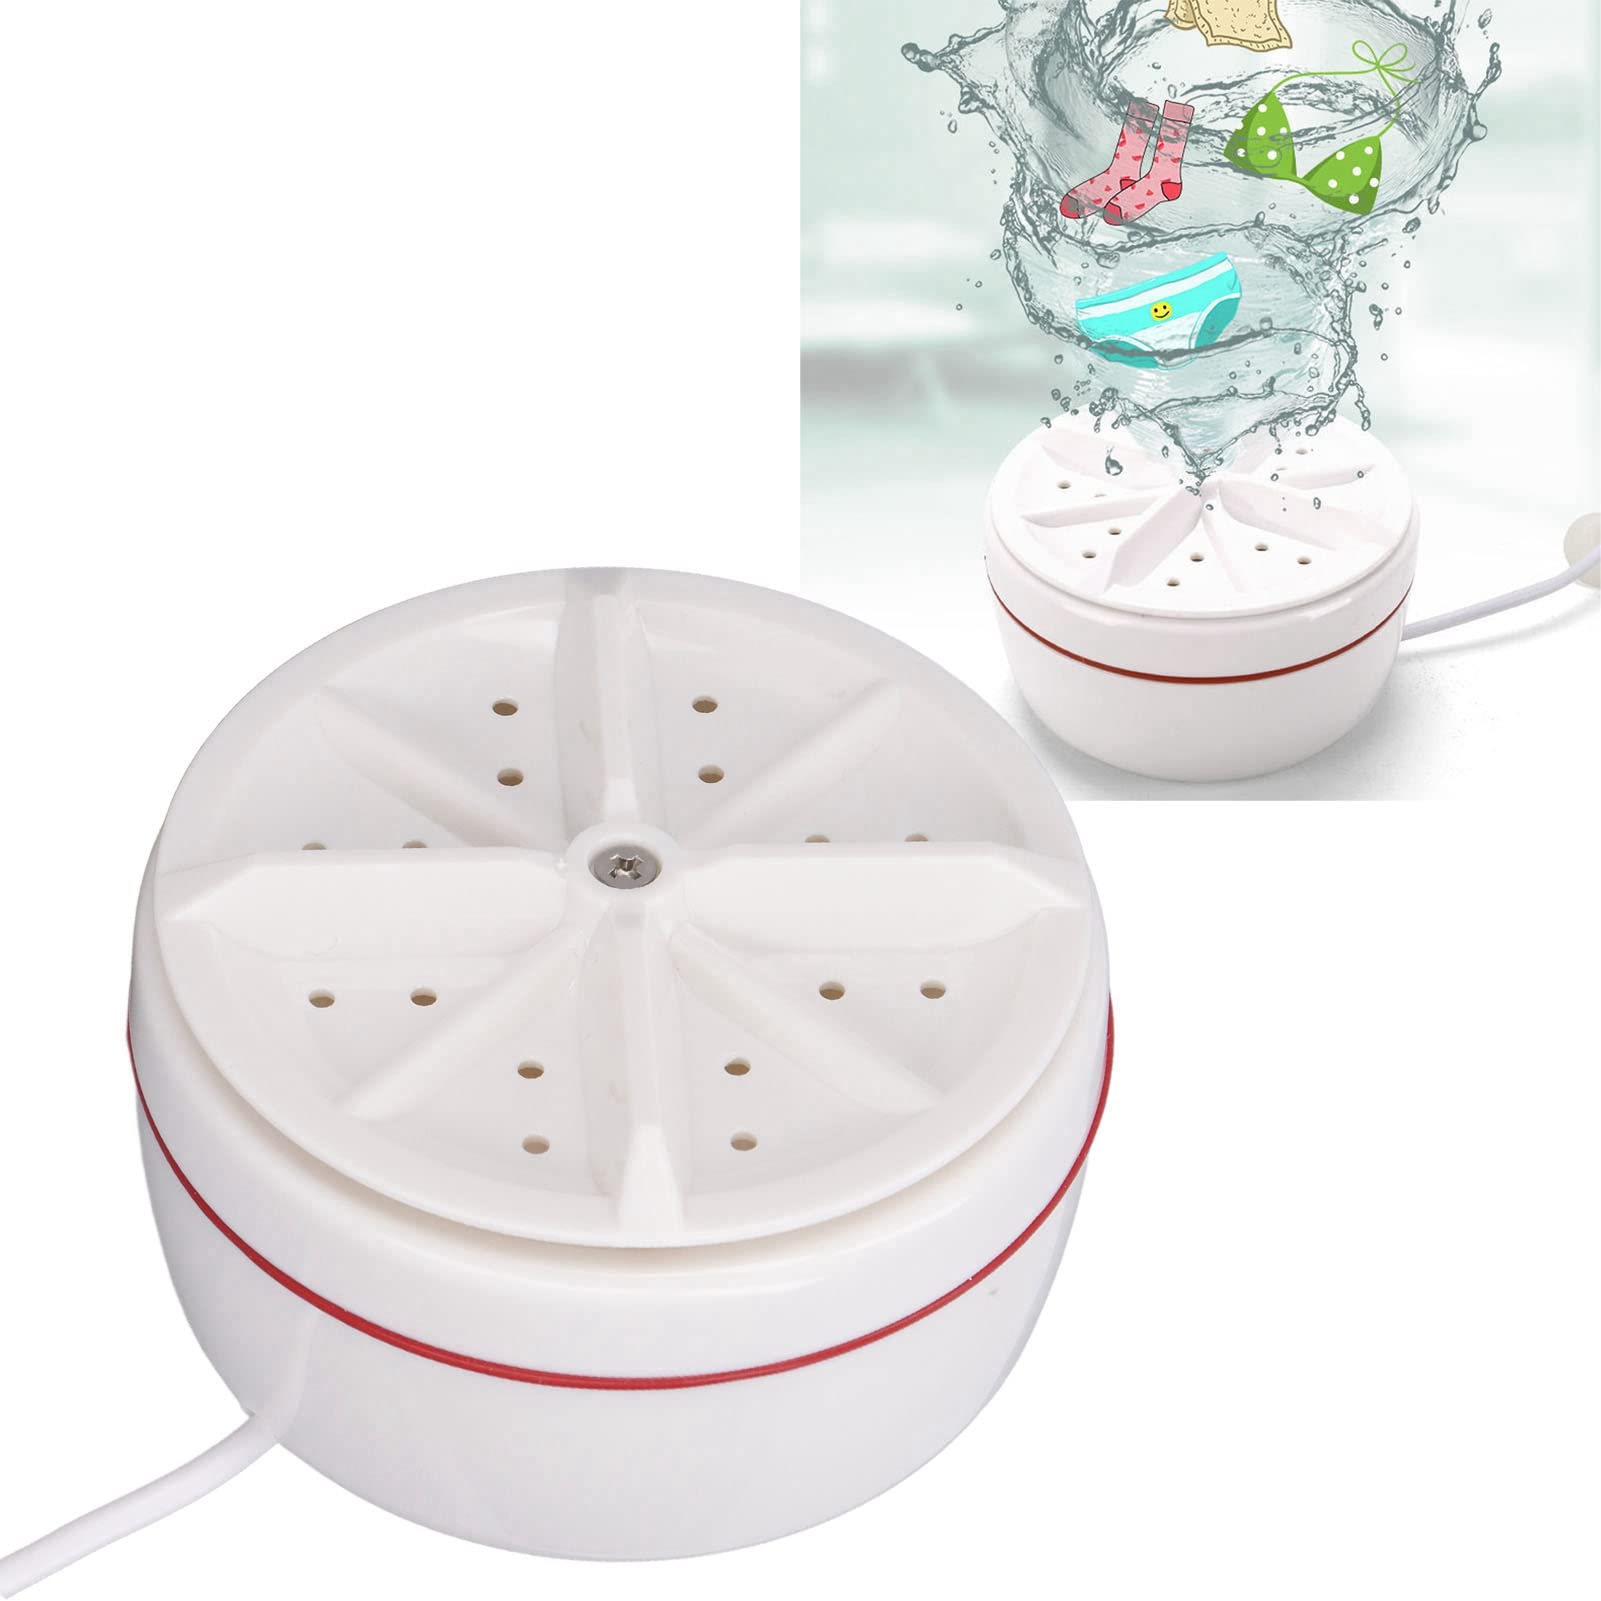 Portable Mini Washing Machine, Foldable Design Sonicleaning Automatic Cycle USB Power Tiny Spaces for Socks Underpant or Small Items, Apartment, Dorm, Camping, RV Travel laundry